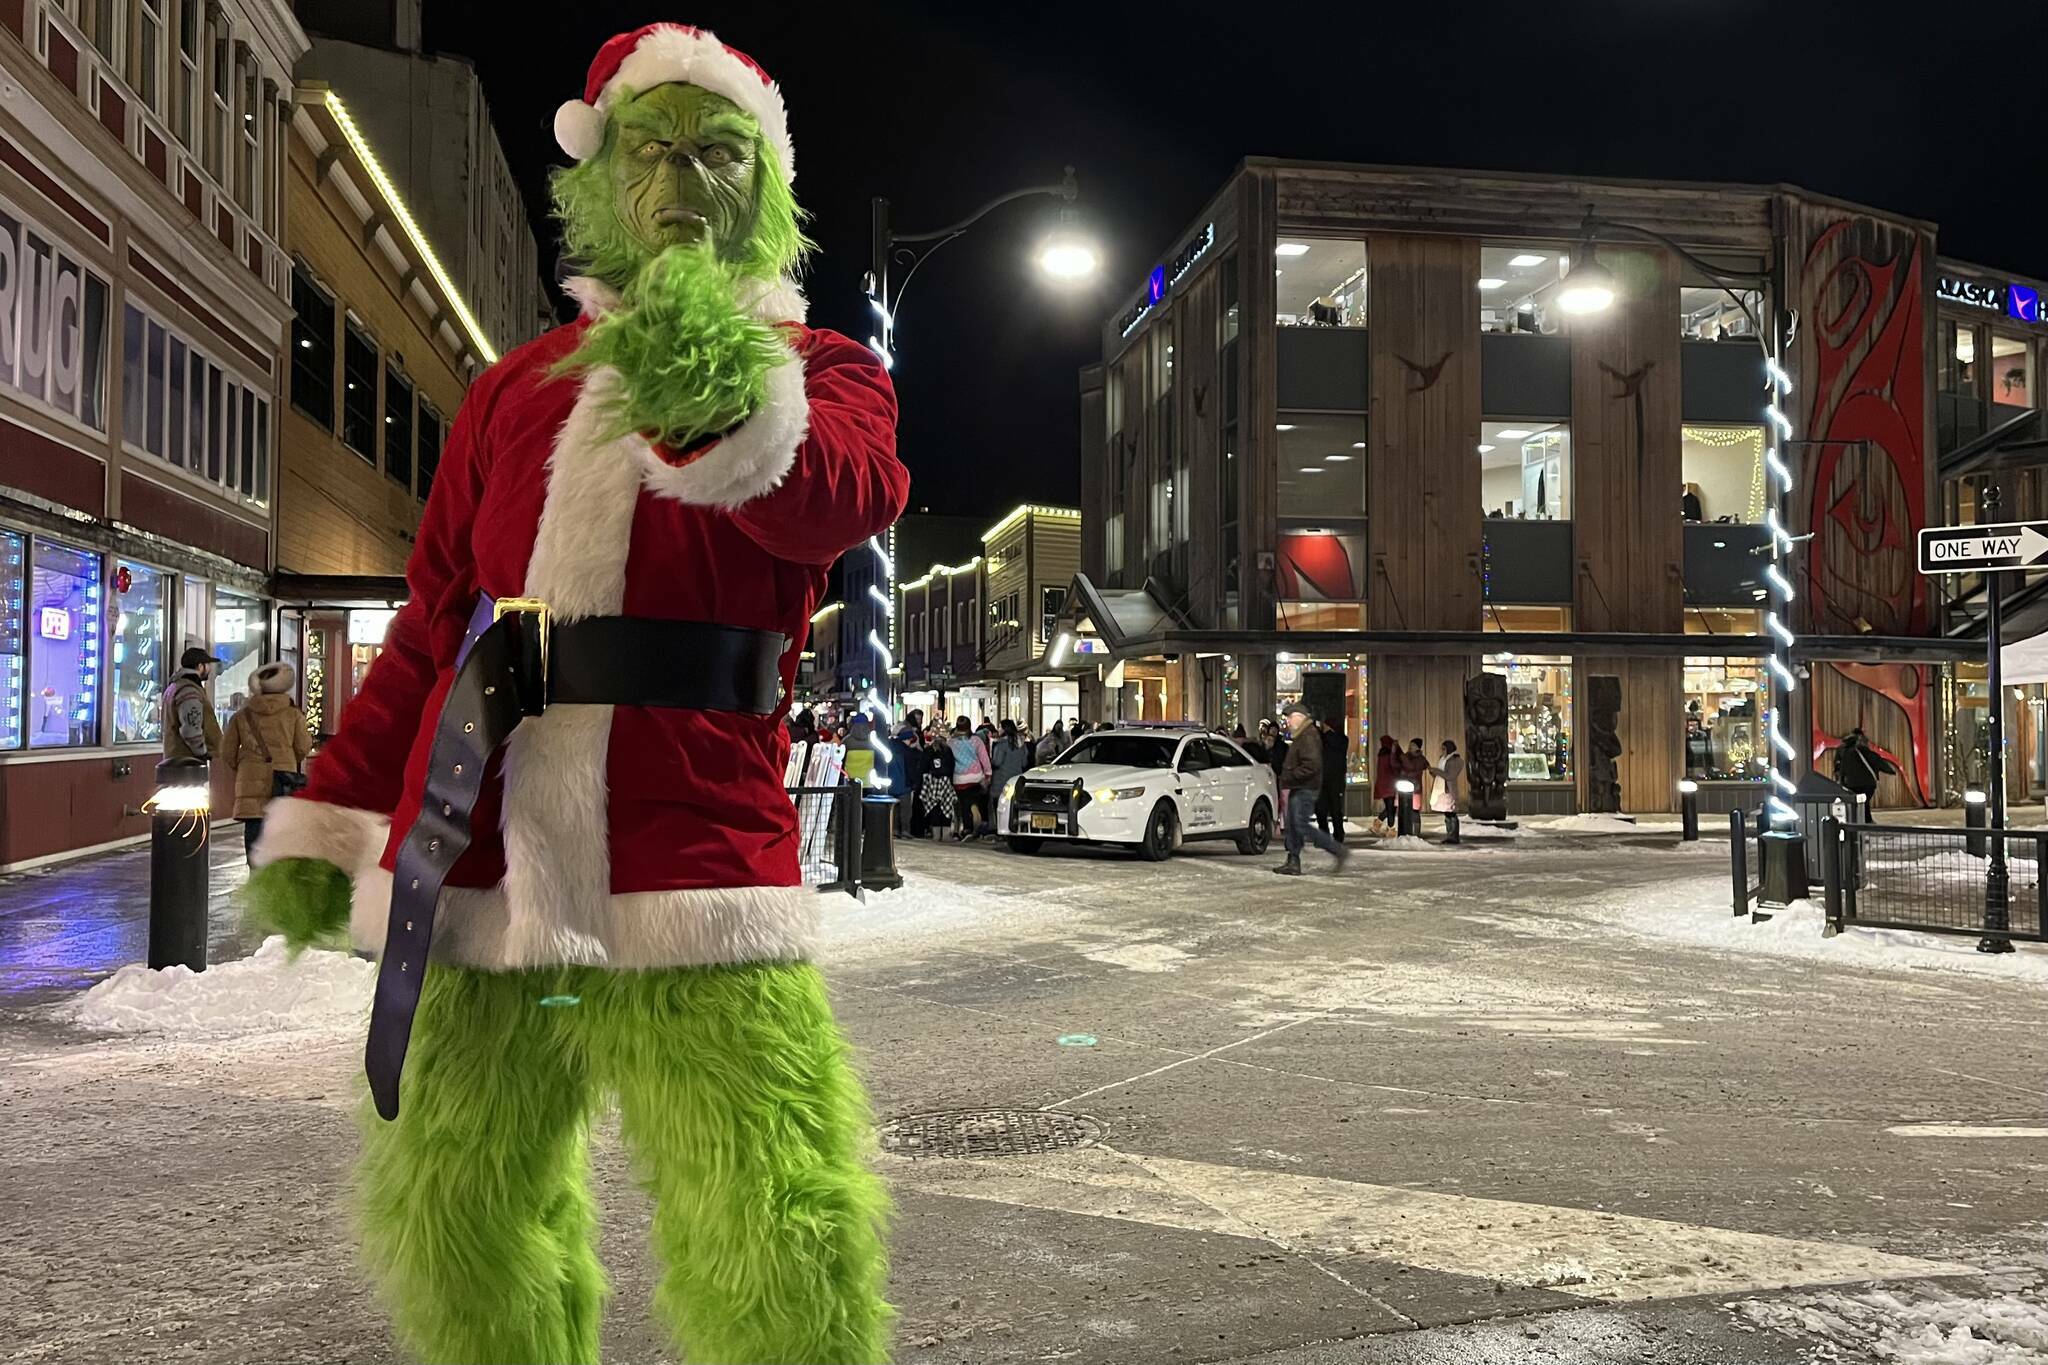 Even the Grinch got into the holiday spirit at last year’s Gallery Walk on Friday, Dec. 2, 2022. (Jonson Kuhn / Juneau Empire File)